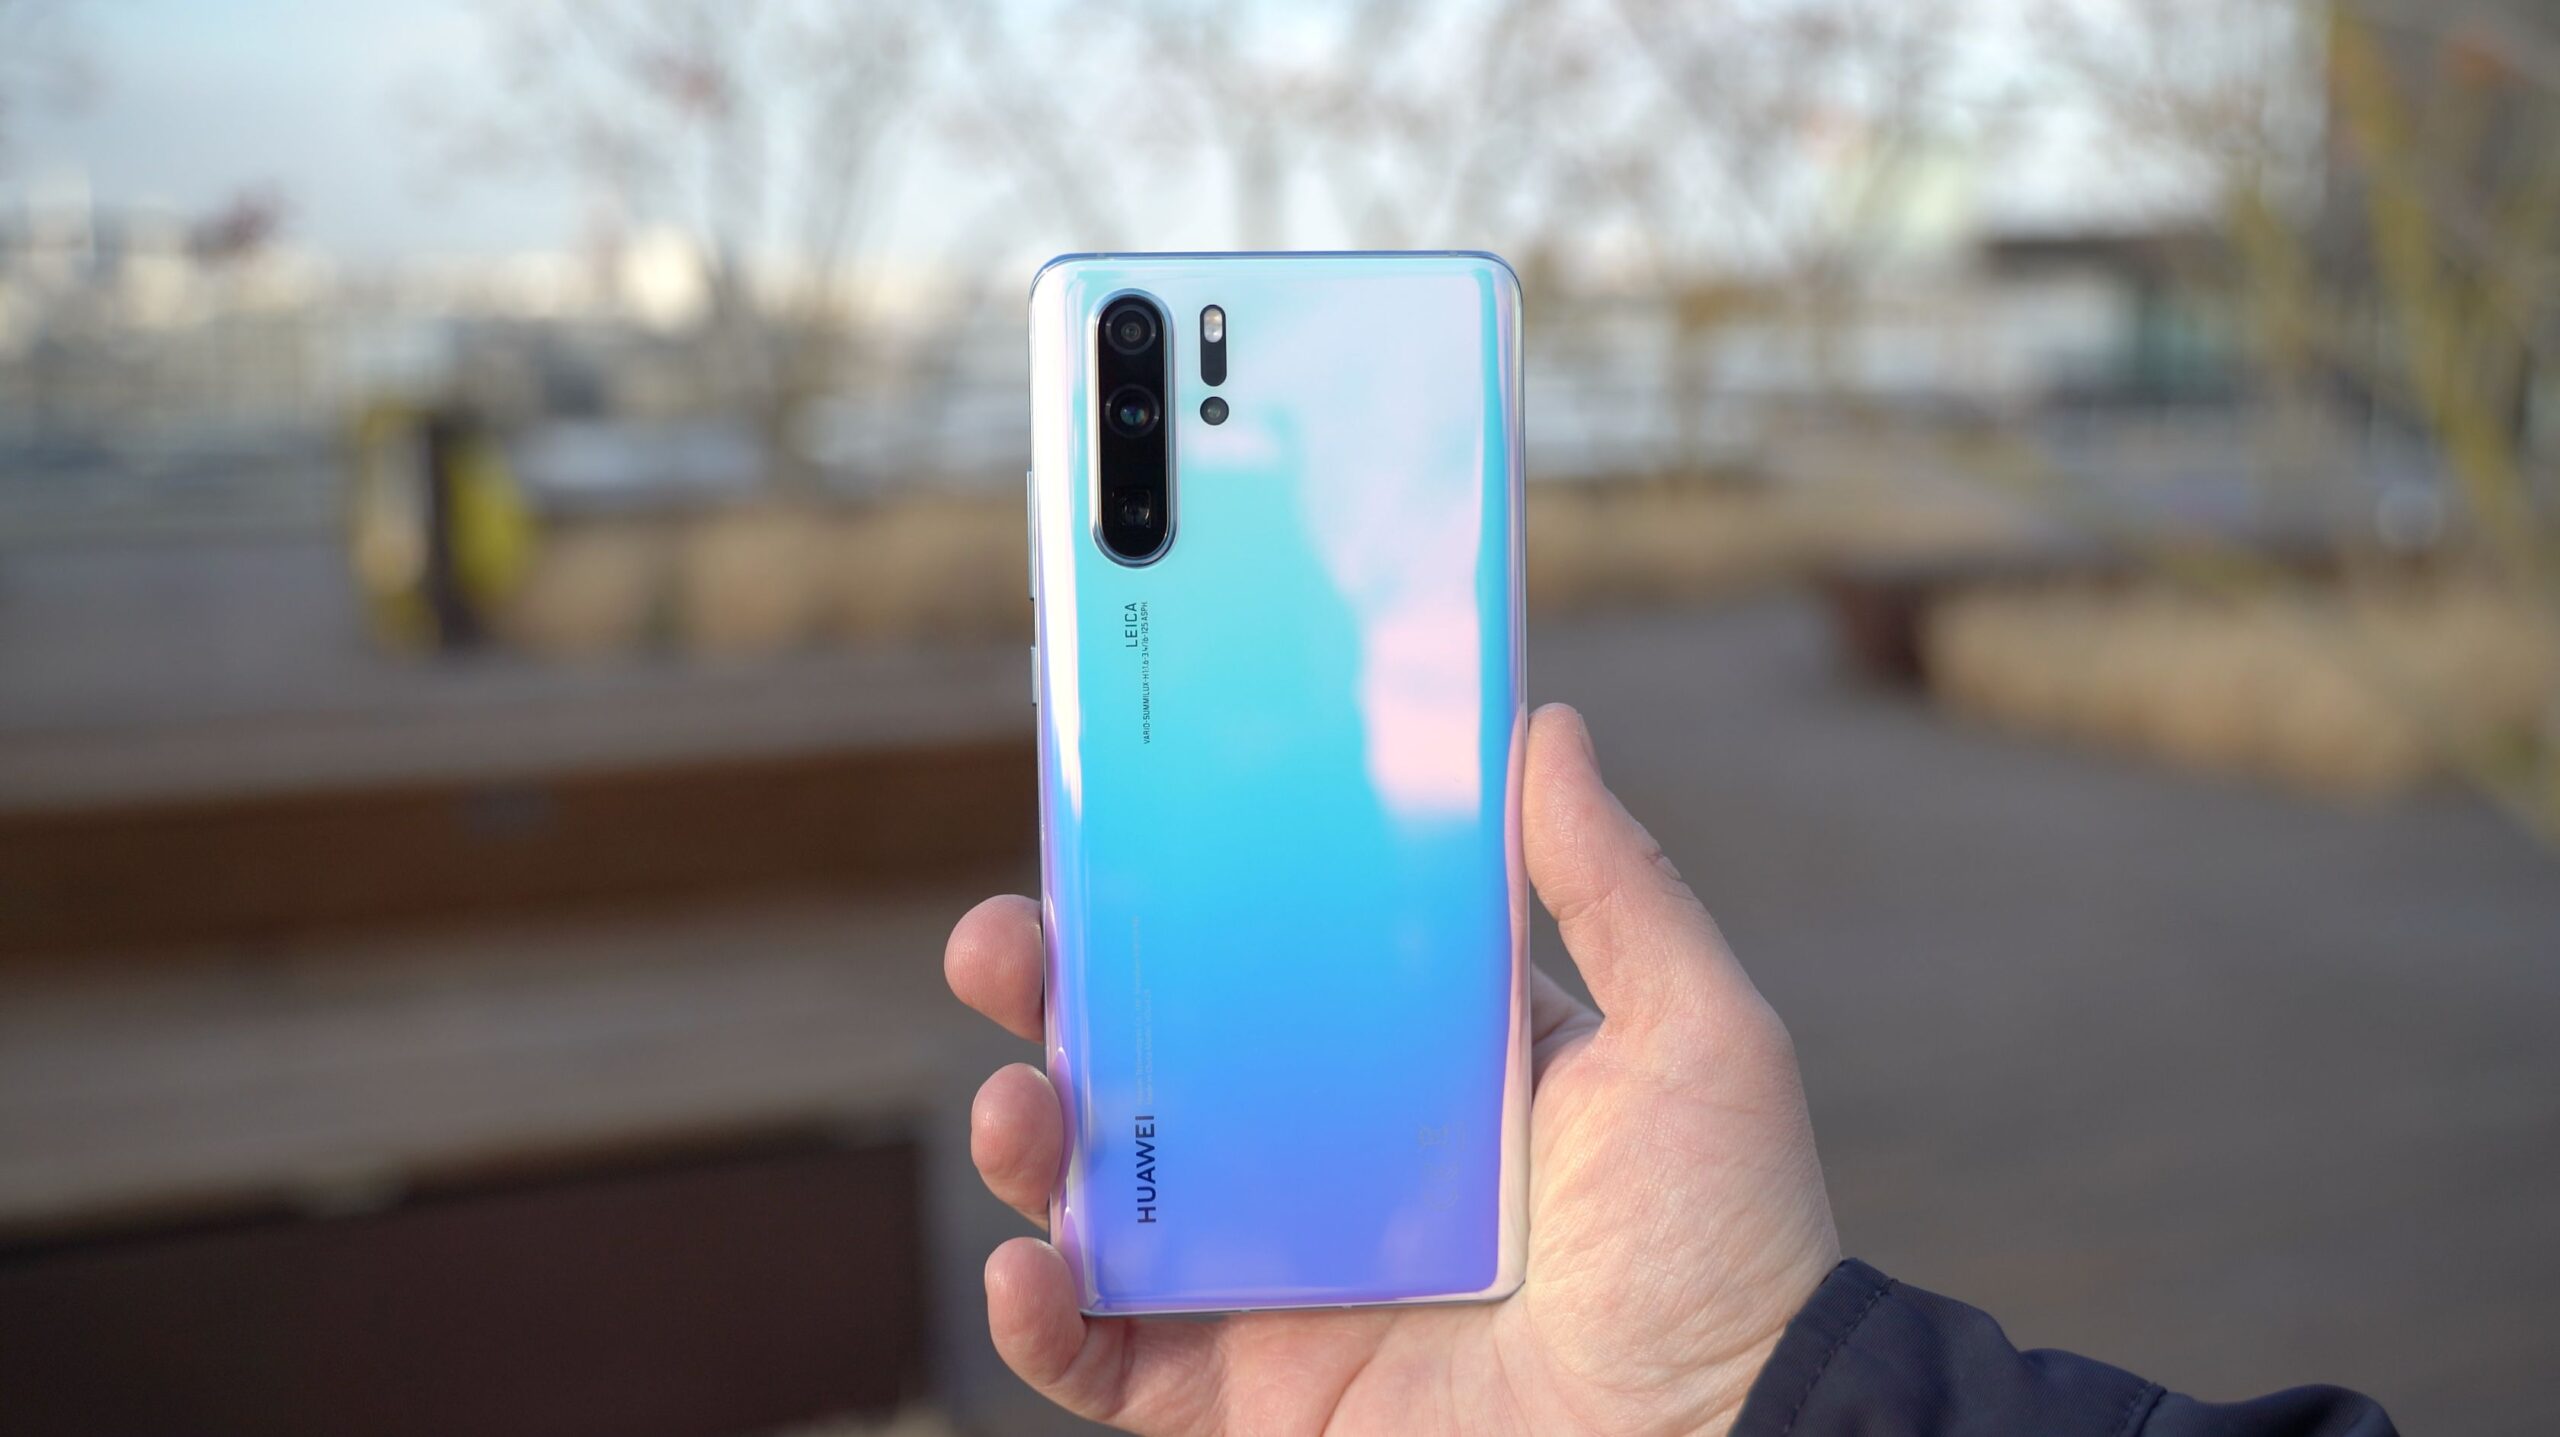 HUAWEI P30 and P30 Pro are receiving EMUI 11 Global Stable update